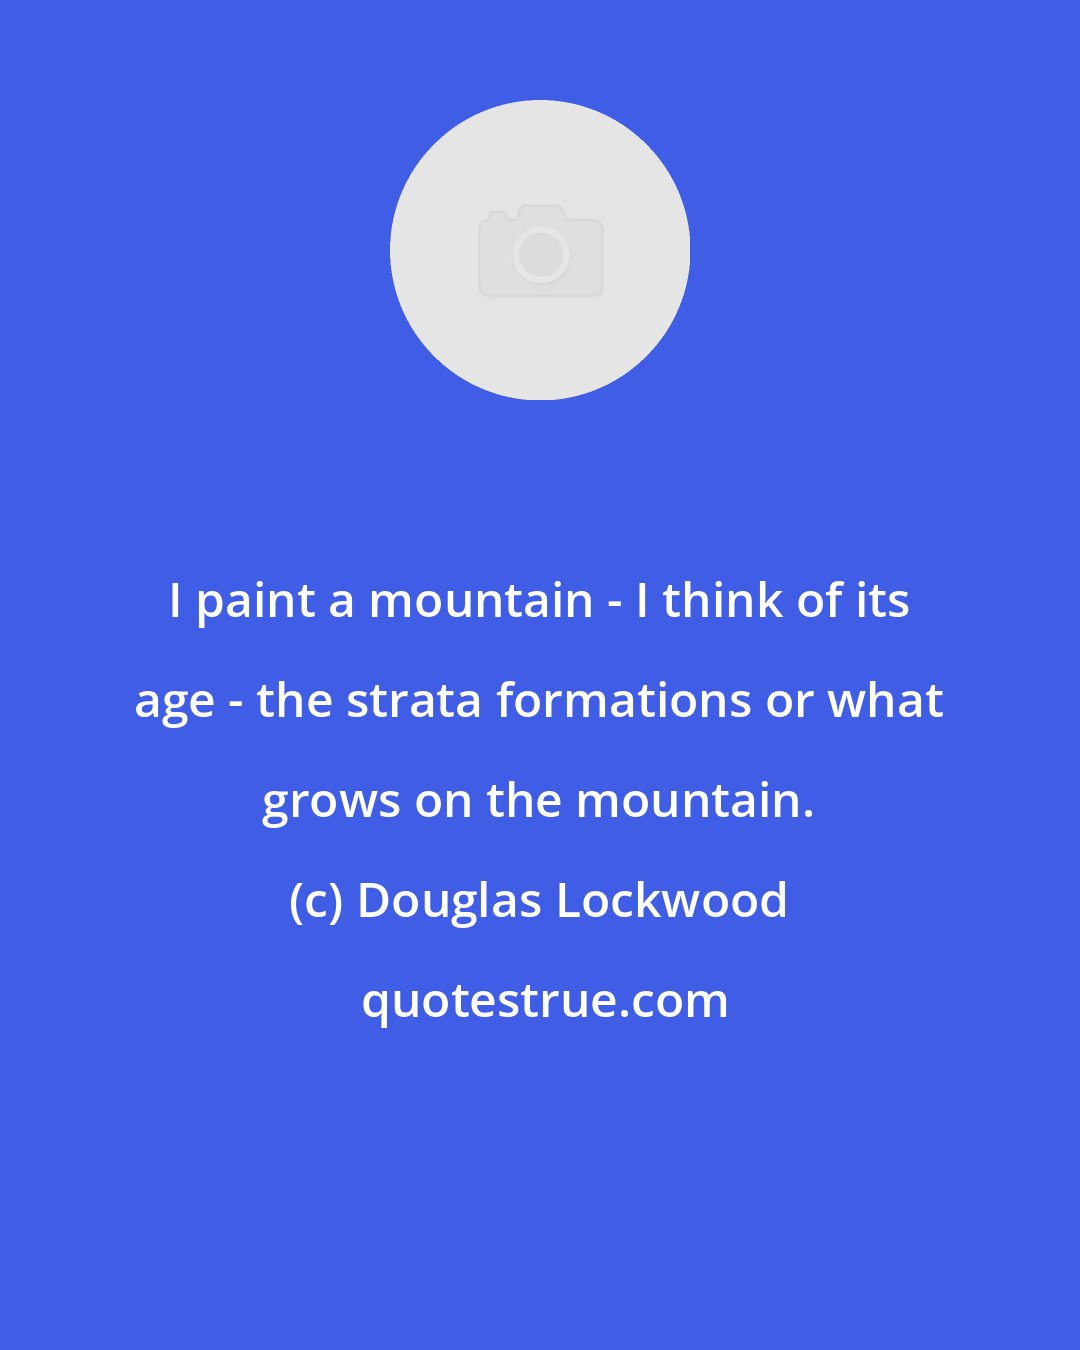 Douglas Lockwood: I paint a mountain - I think of its age - the strata formations or what grows on the mountain.